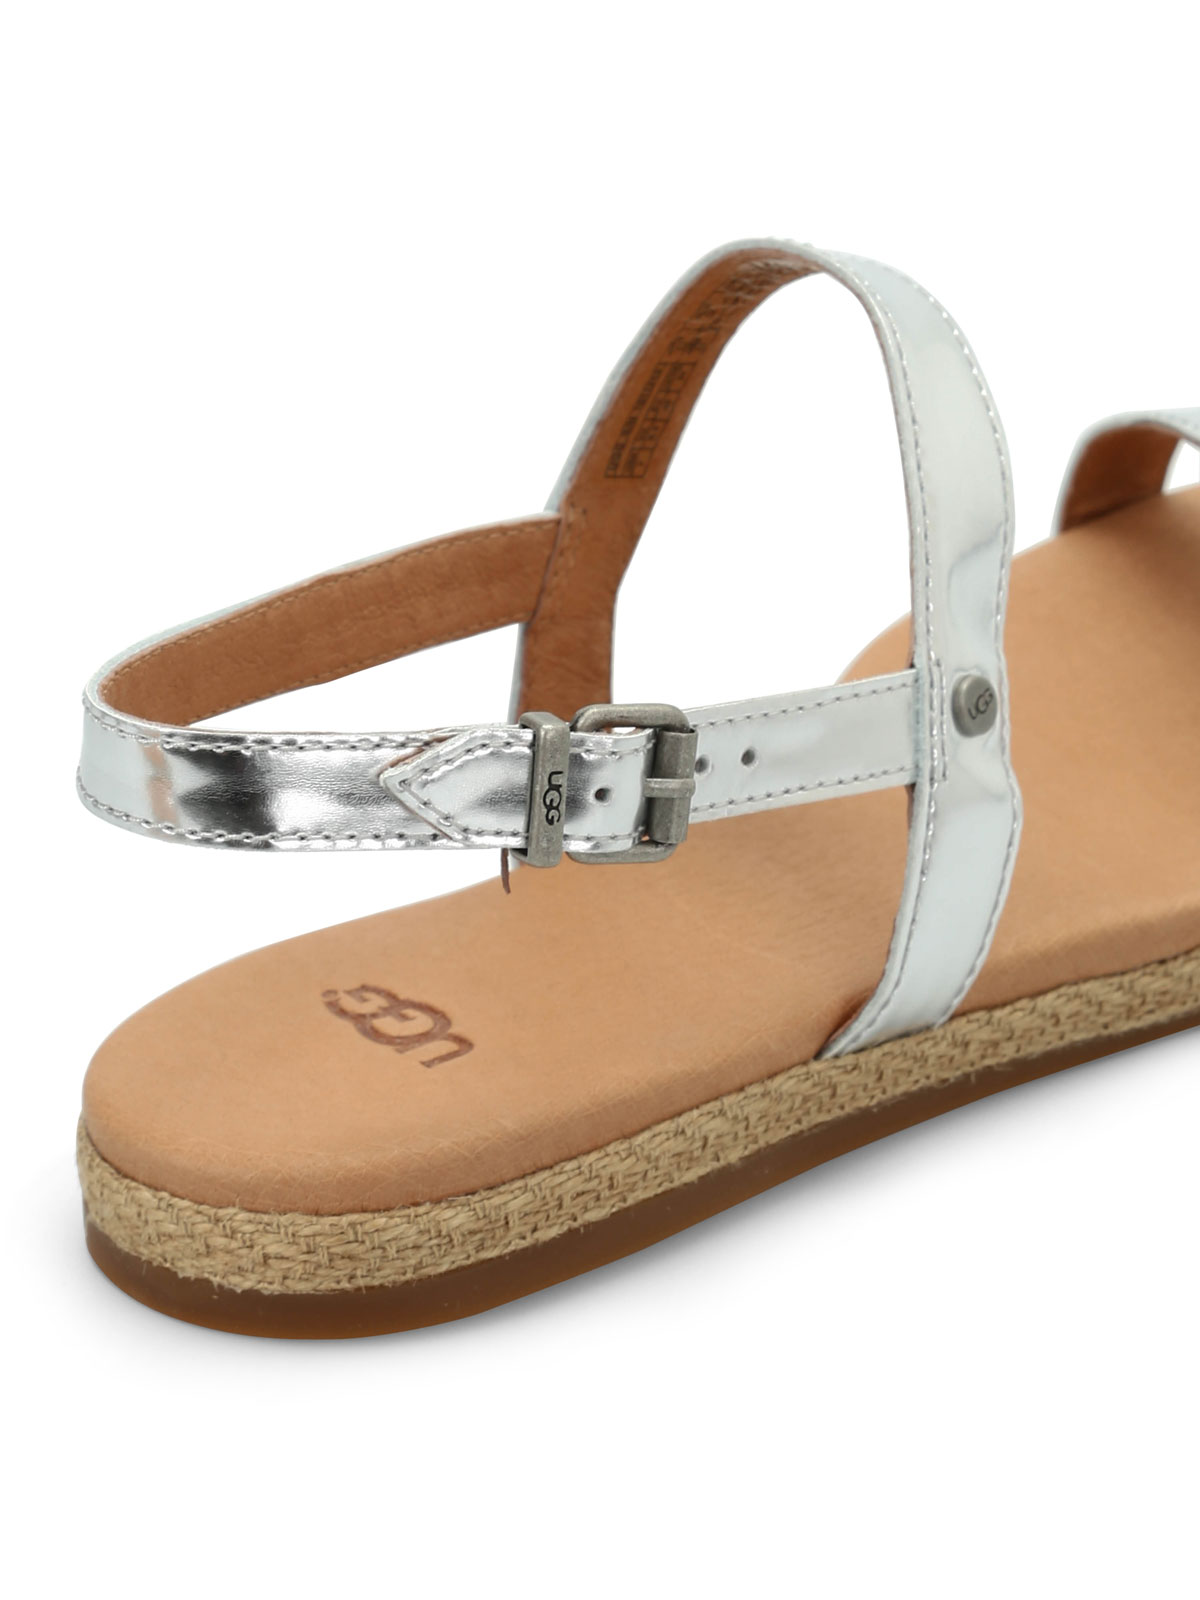 Ugg - Brylee patent leather sandals 